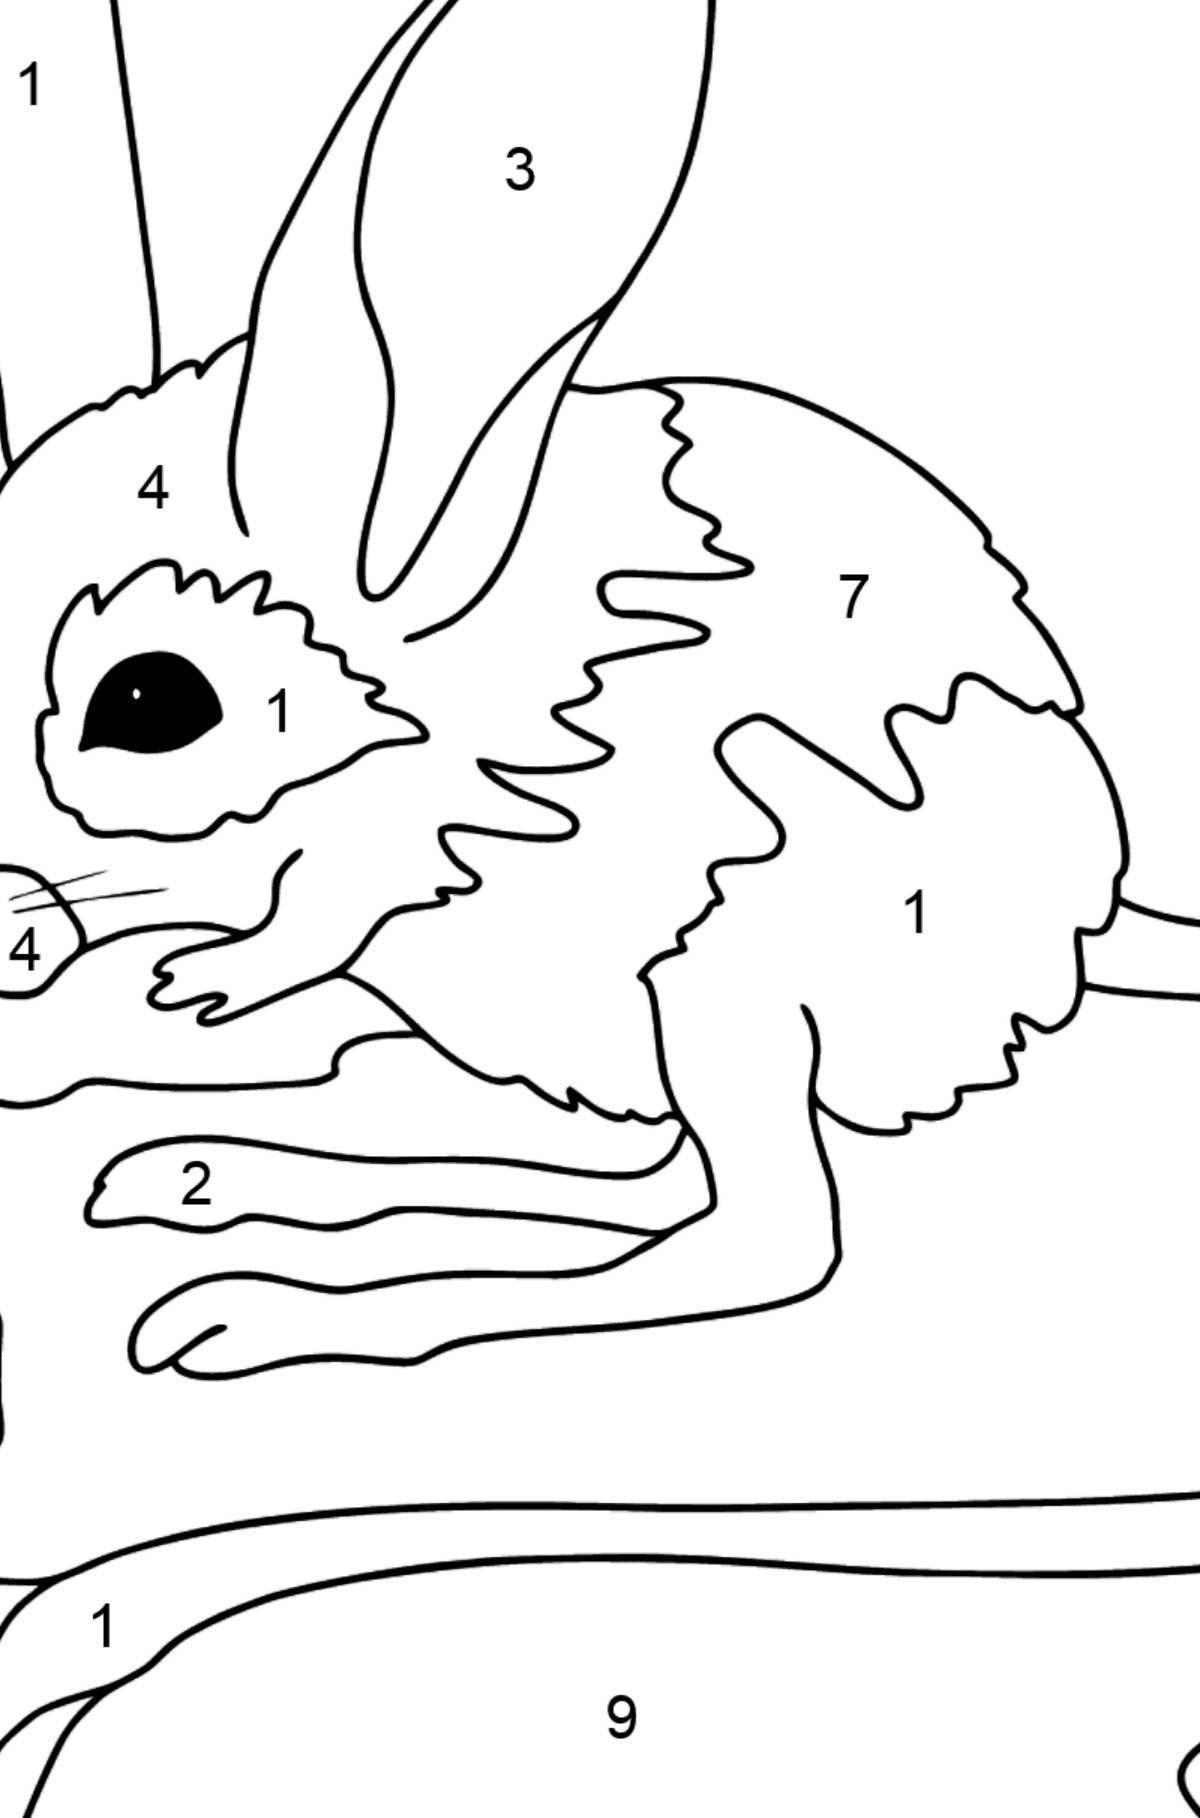 Adorable bunny coloring by numbers